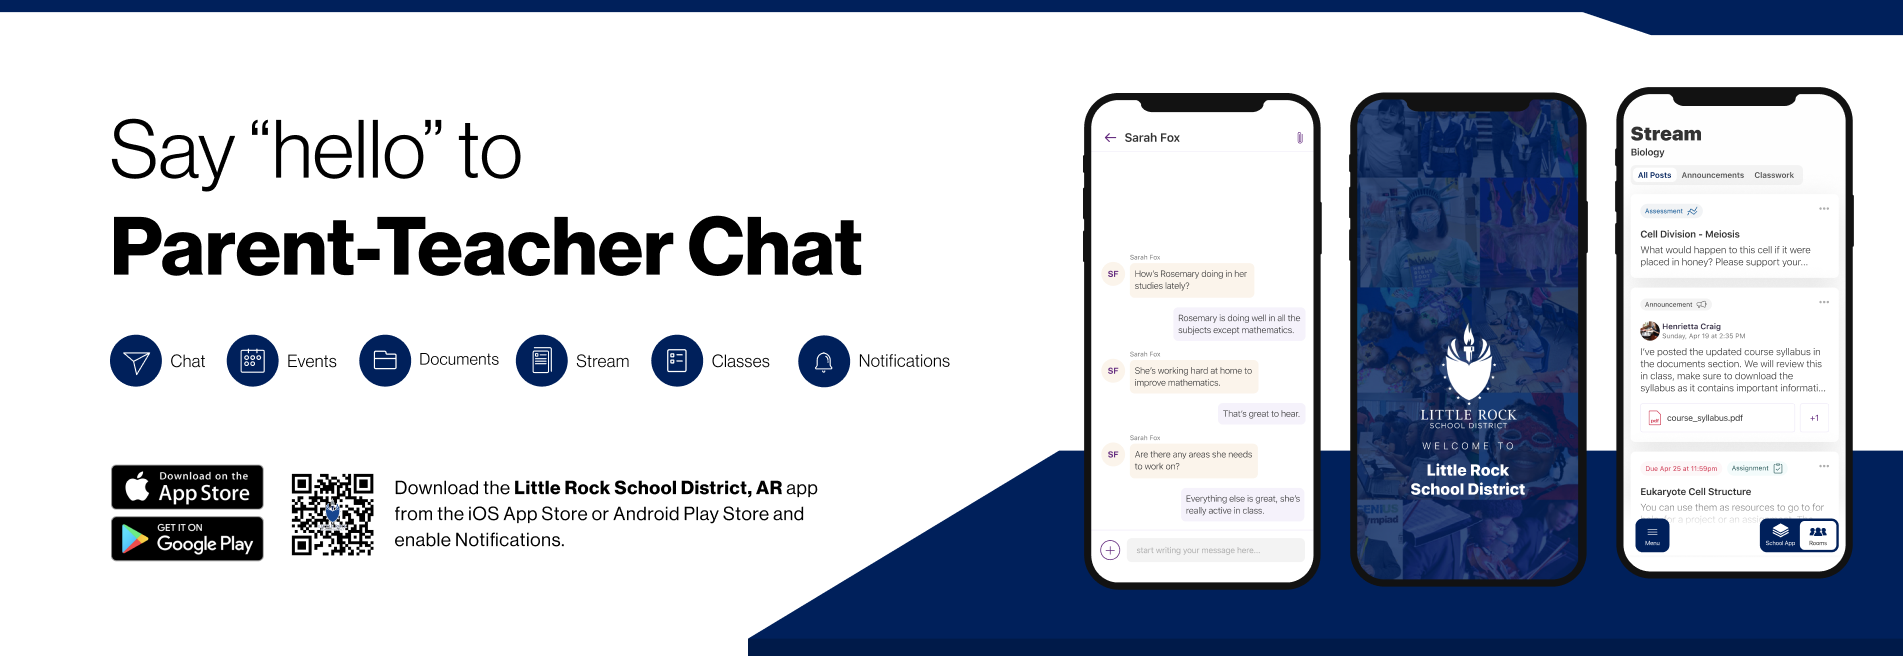 Say hello to Parent-Teacher chat in the new Rooms app. Download the Little Rock School District app in the Google Play or Apple App store.